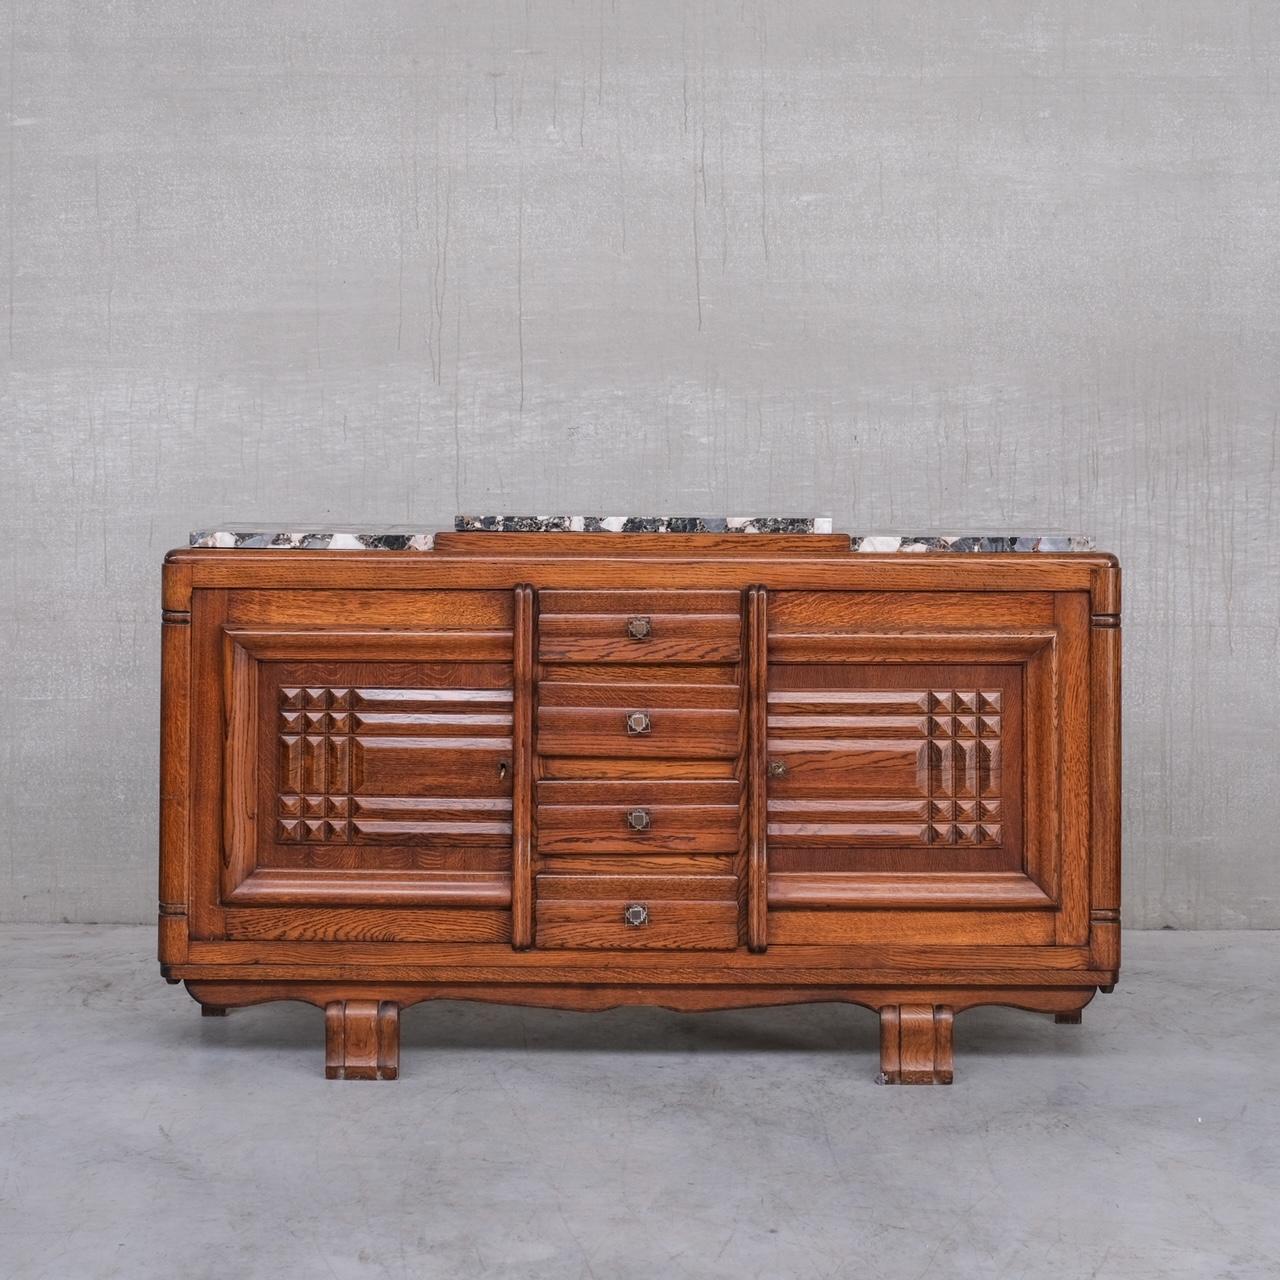 A French late Art Deco sideboard, likely by Gaston Poisson. 

France, c1940s. 

Oak and marble. 

The marble top has some chips and nicks, it could easily be replaced. 

Original keys retained. 

Location: Belgium Gallery. 

Dimensions: